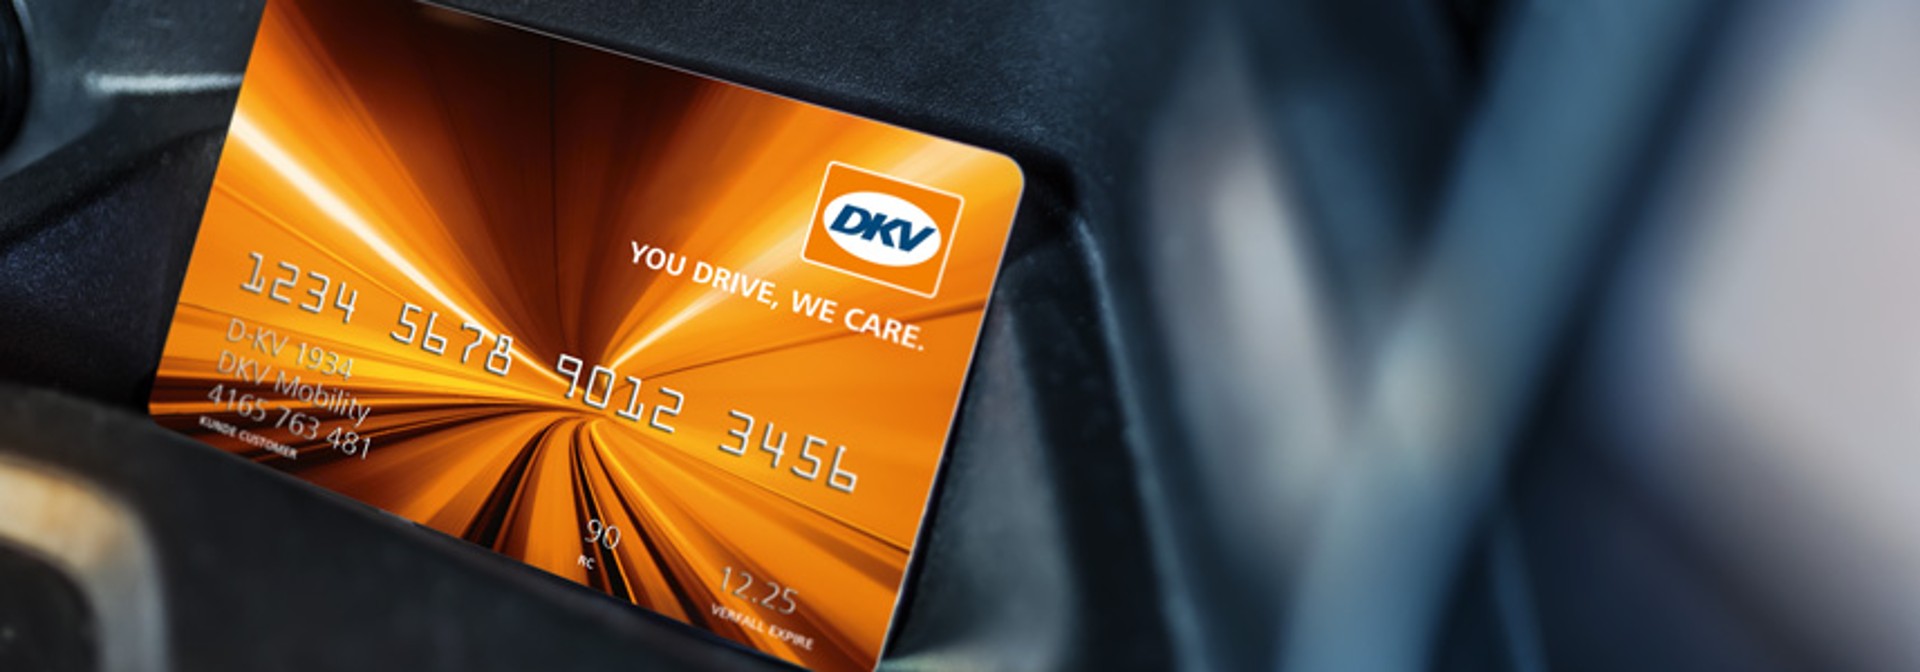 pay with DKV Card